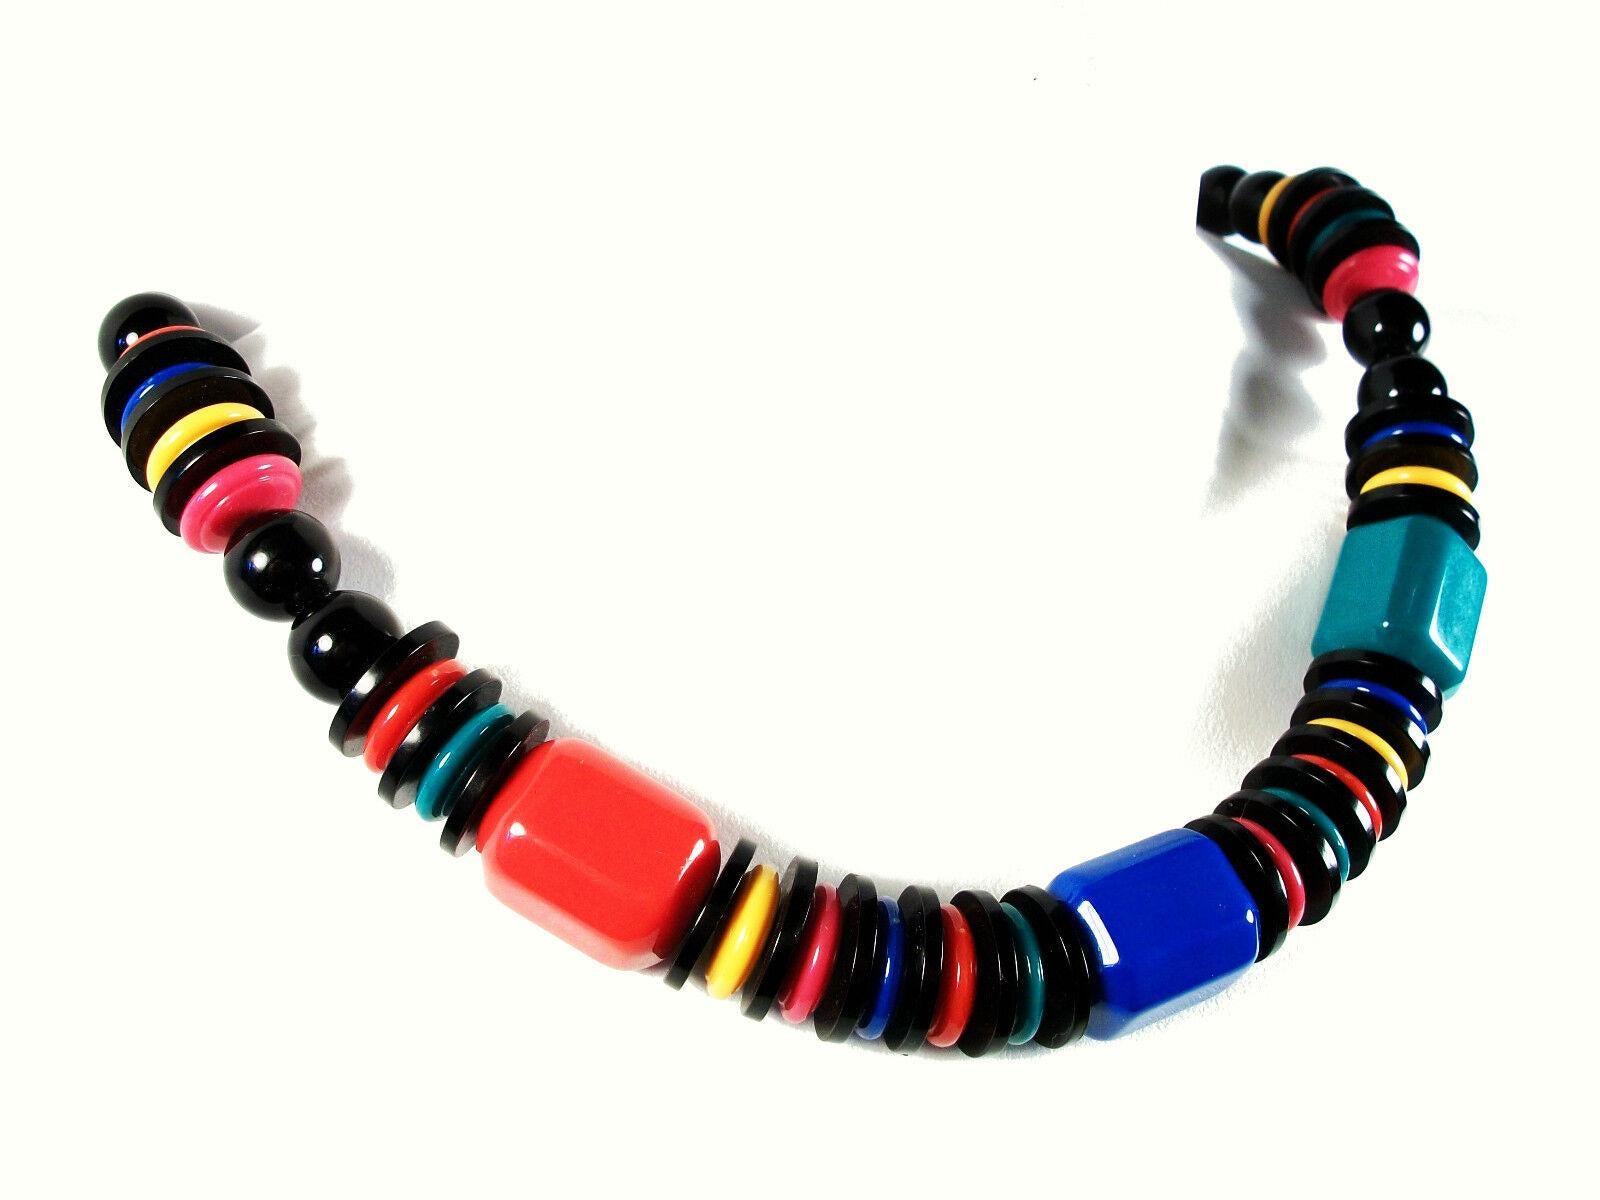 Vintage Multi-color & Black Acrylic Bead Necklace - Unsigned - Circa 1980's For Sale 2